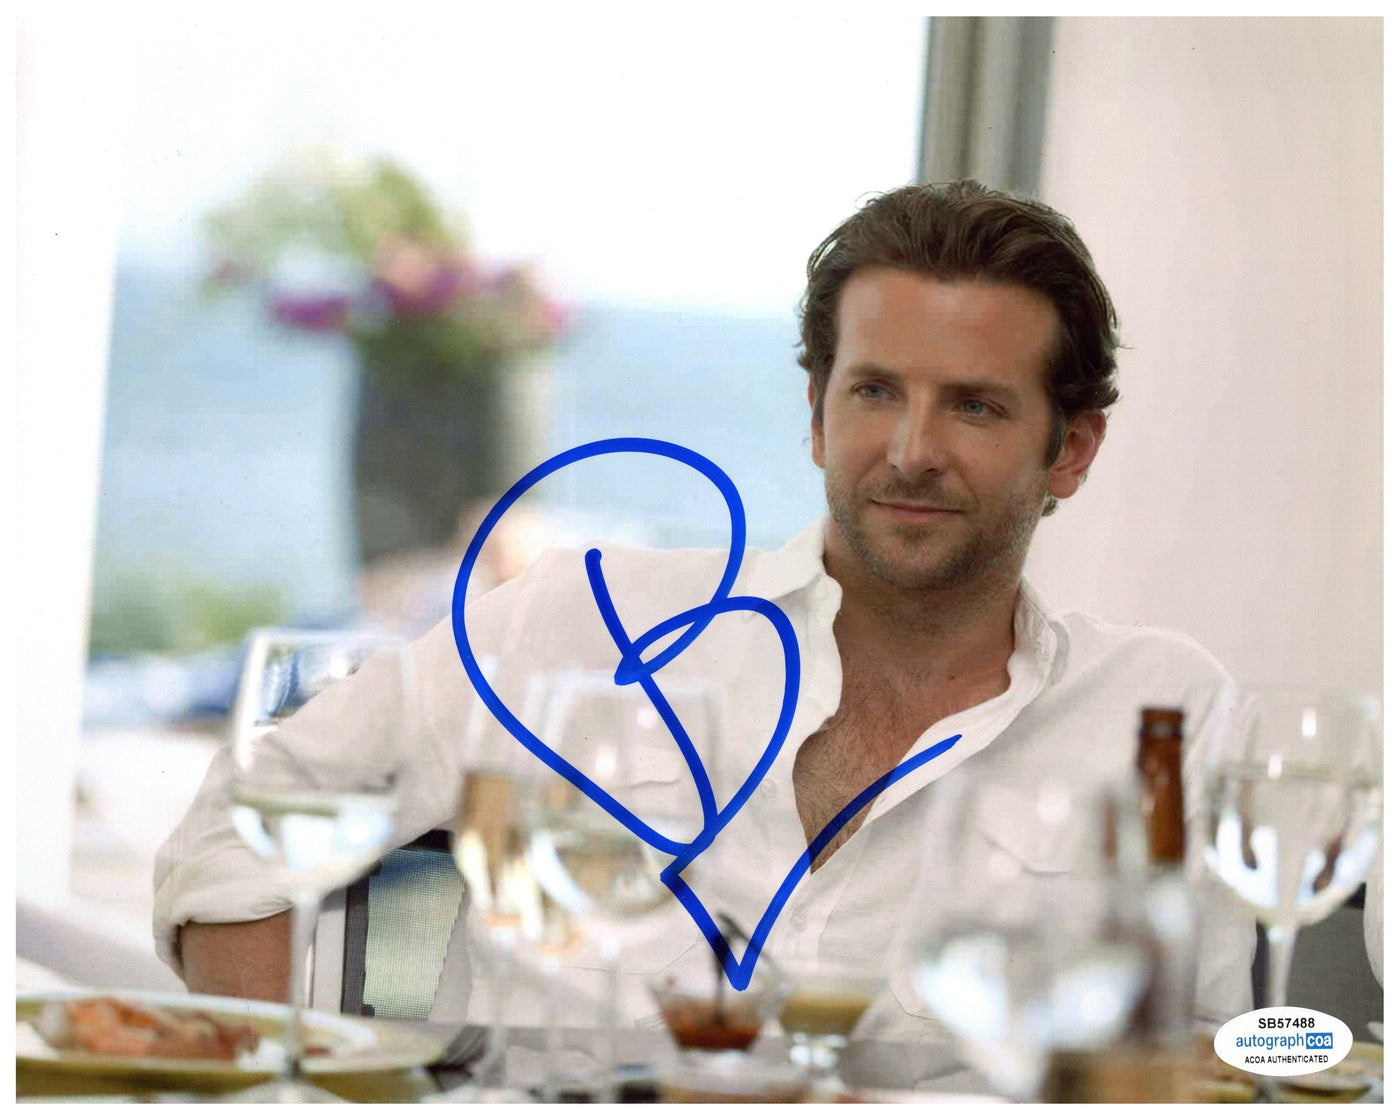 Bradley Cooper Signed 8x10 Photo Limitless Authentic Autographed ACOA